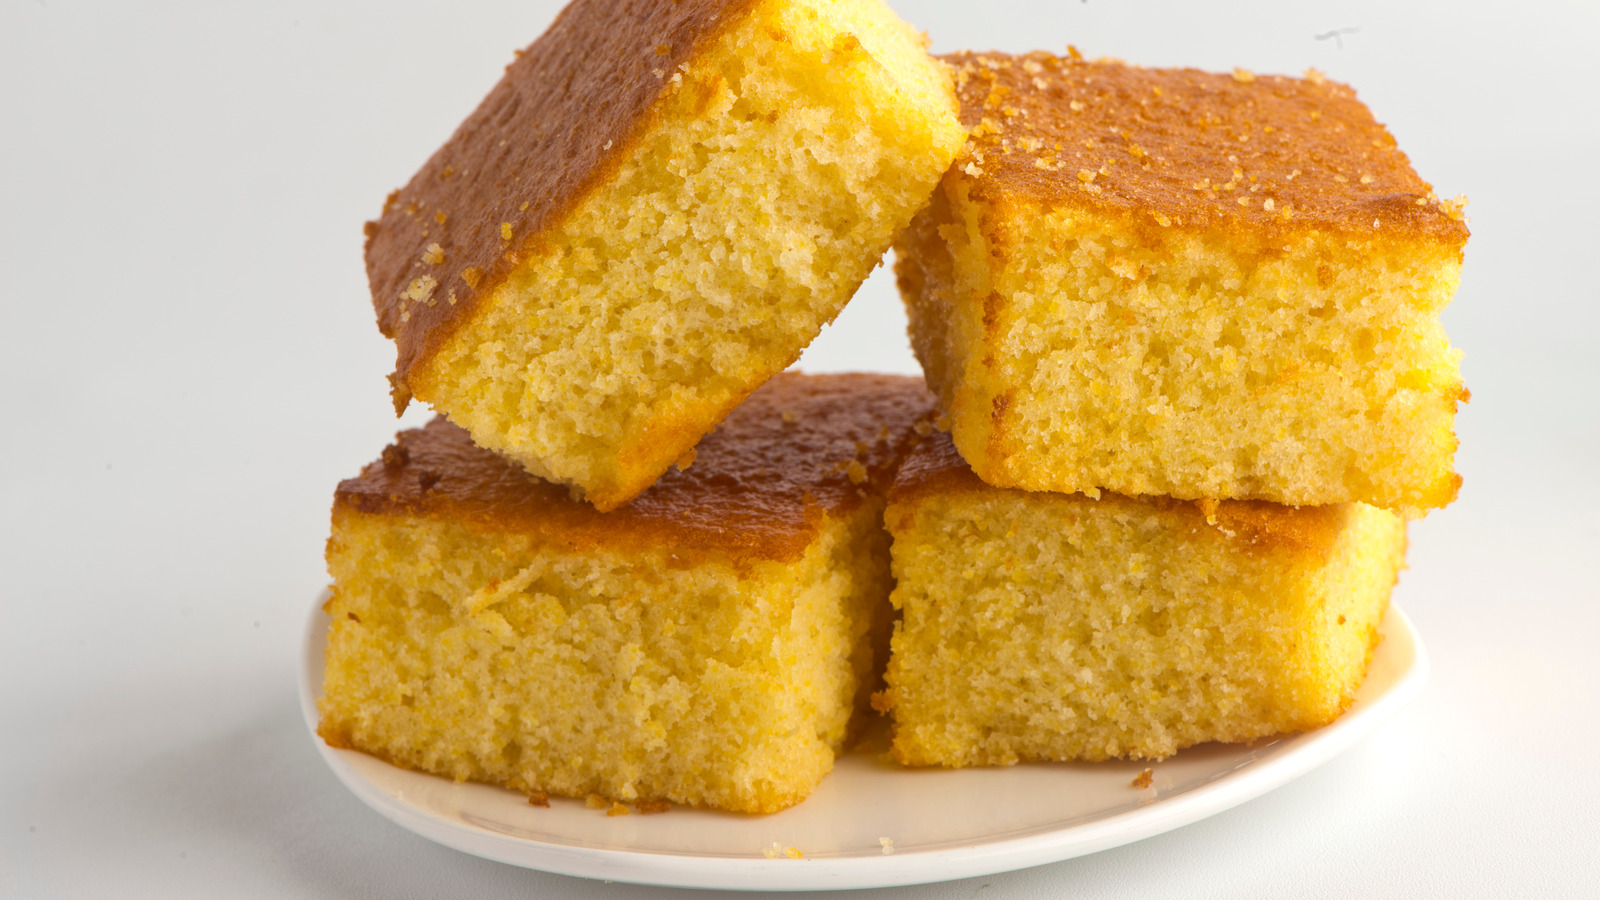 For Crispy-Crusted Cornbread, Follow This One Rule